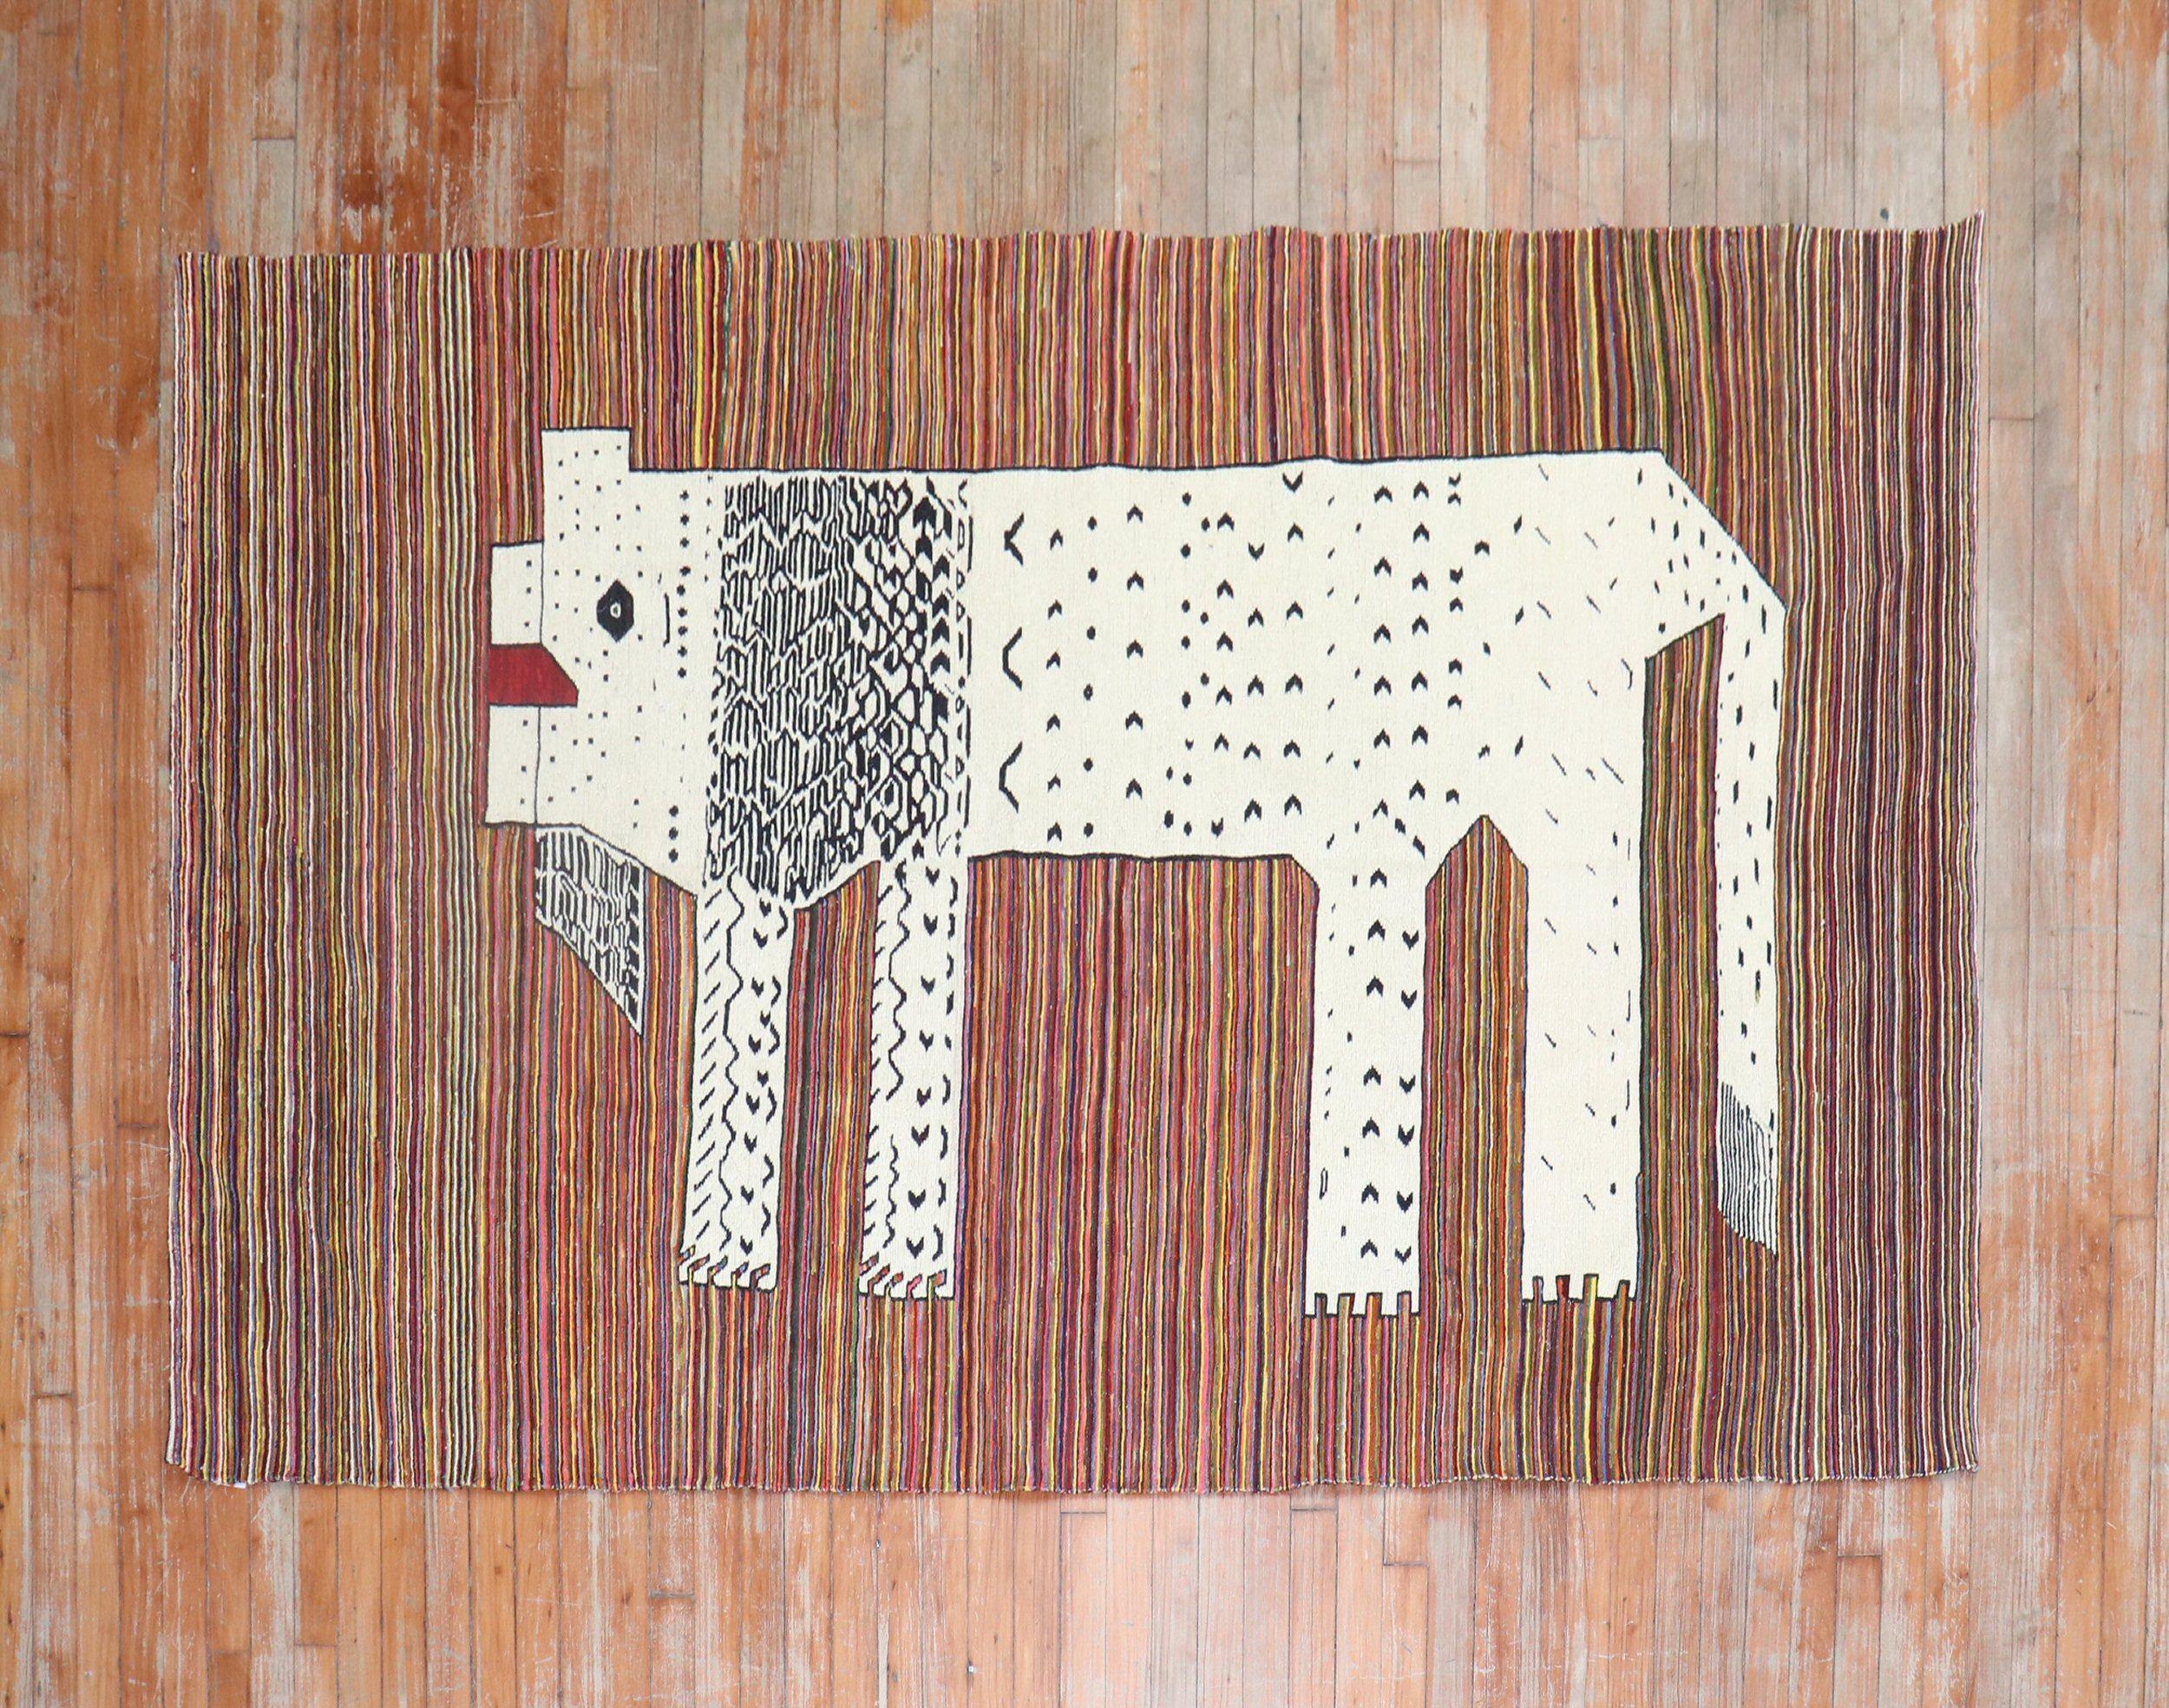 Accent size Persian kilim from the late 20th century with a lion on a striped field

Measures: 4'9'' x 7'7''.

This was originally belonging to a private Persian collector who requested to make a custom collection of flat-weaves with quirky